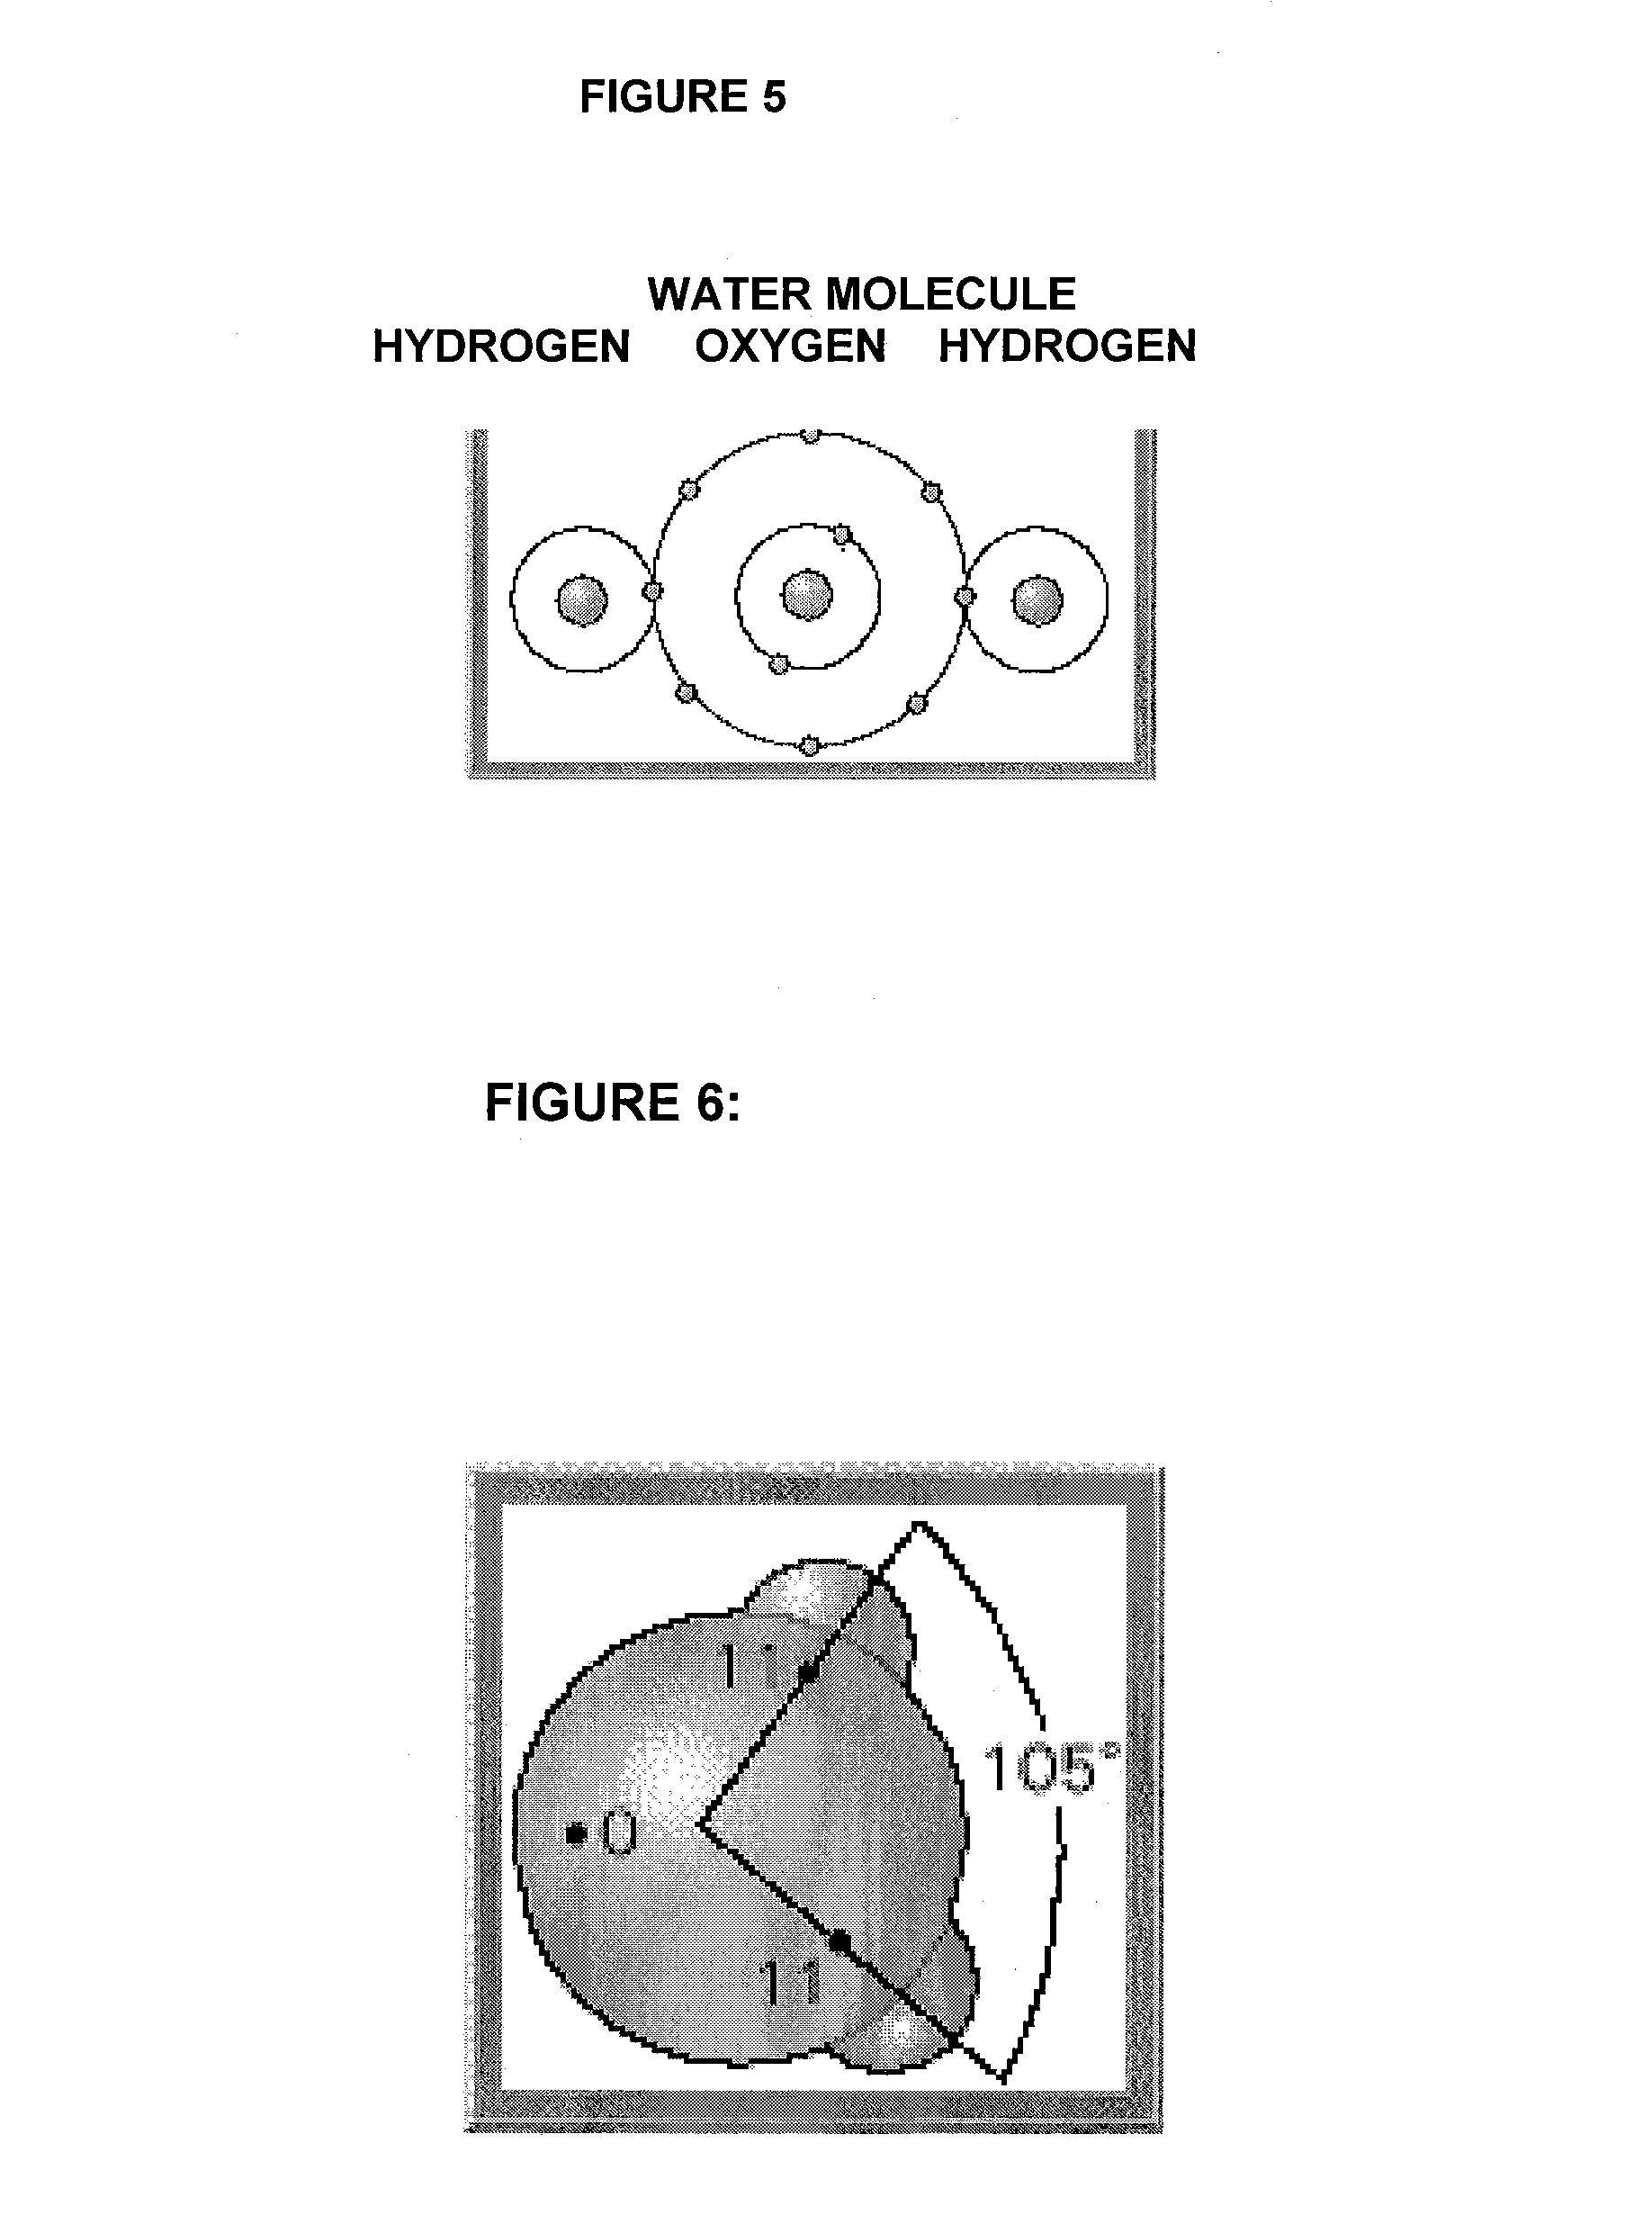 Process and apparatus for decontaminating water by producing hydroxyl ions through hydrolysis of water molecules